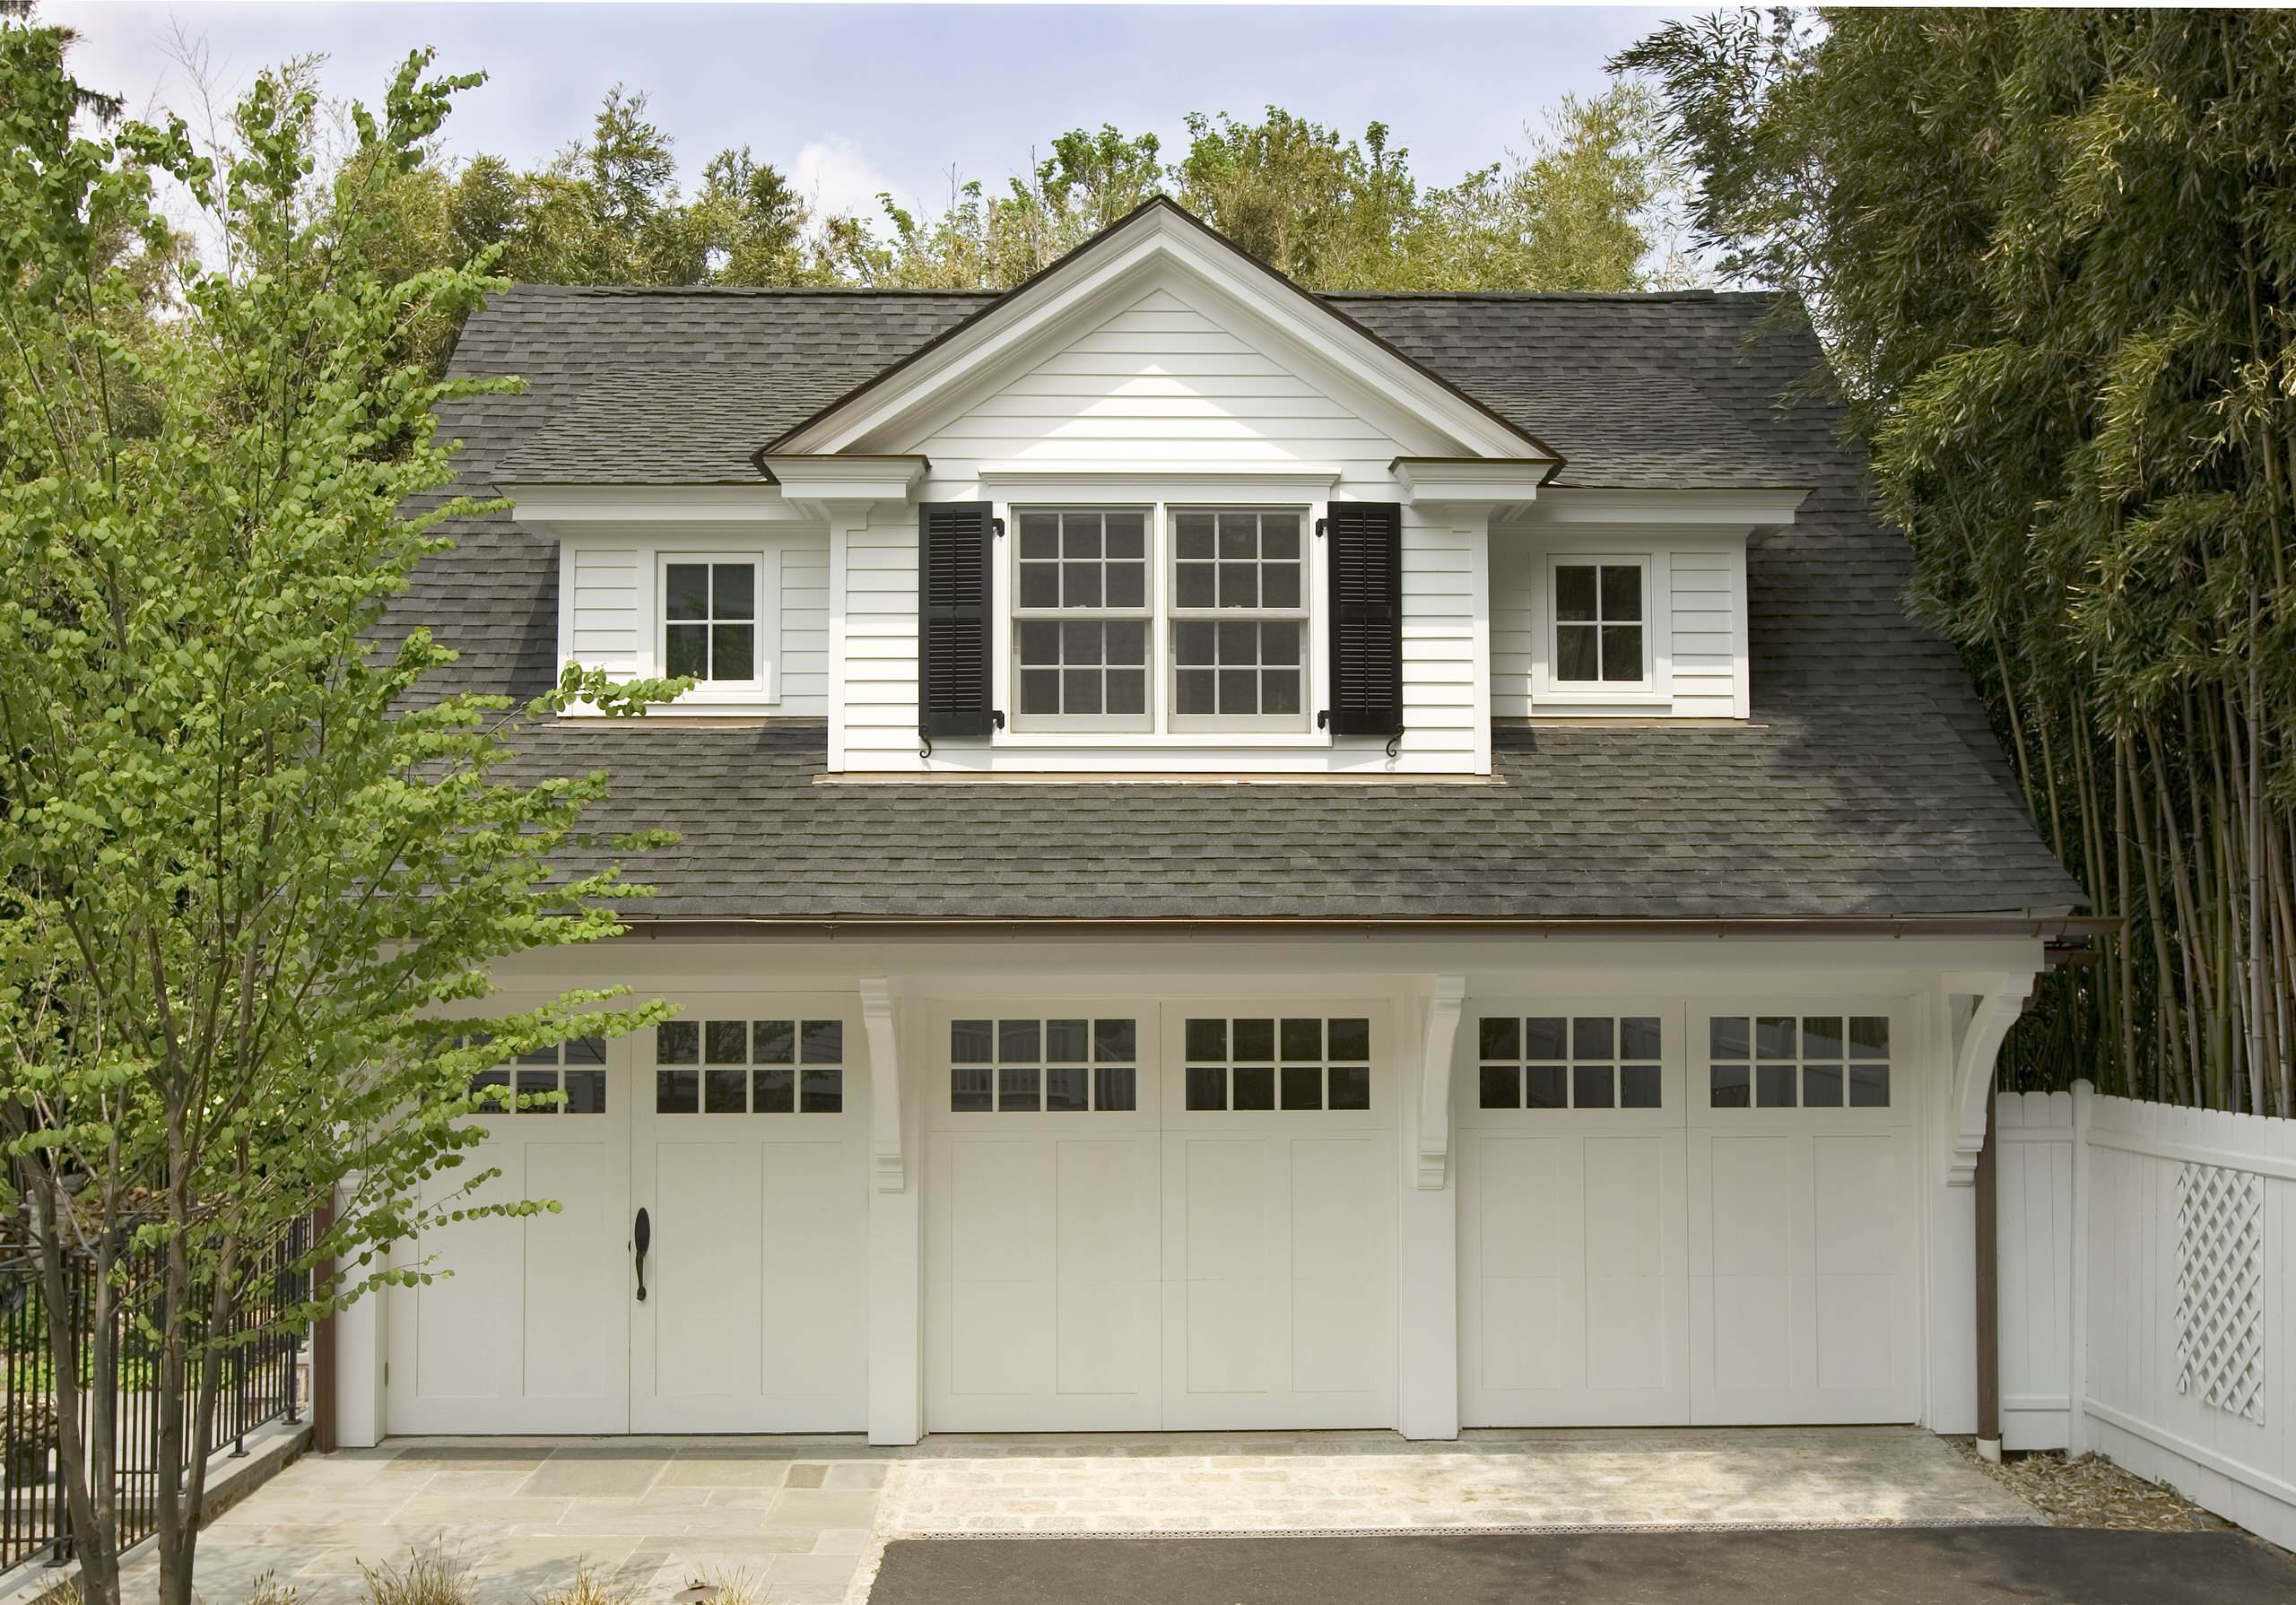 3 Car Garage Traditional, How Much To Build A 3 Car Garage With Apartment Above